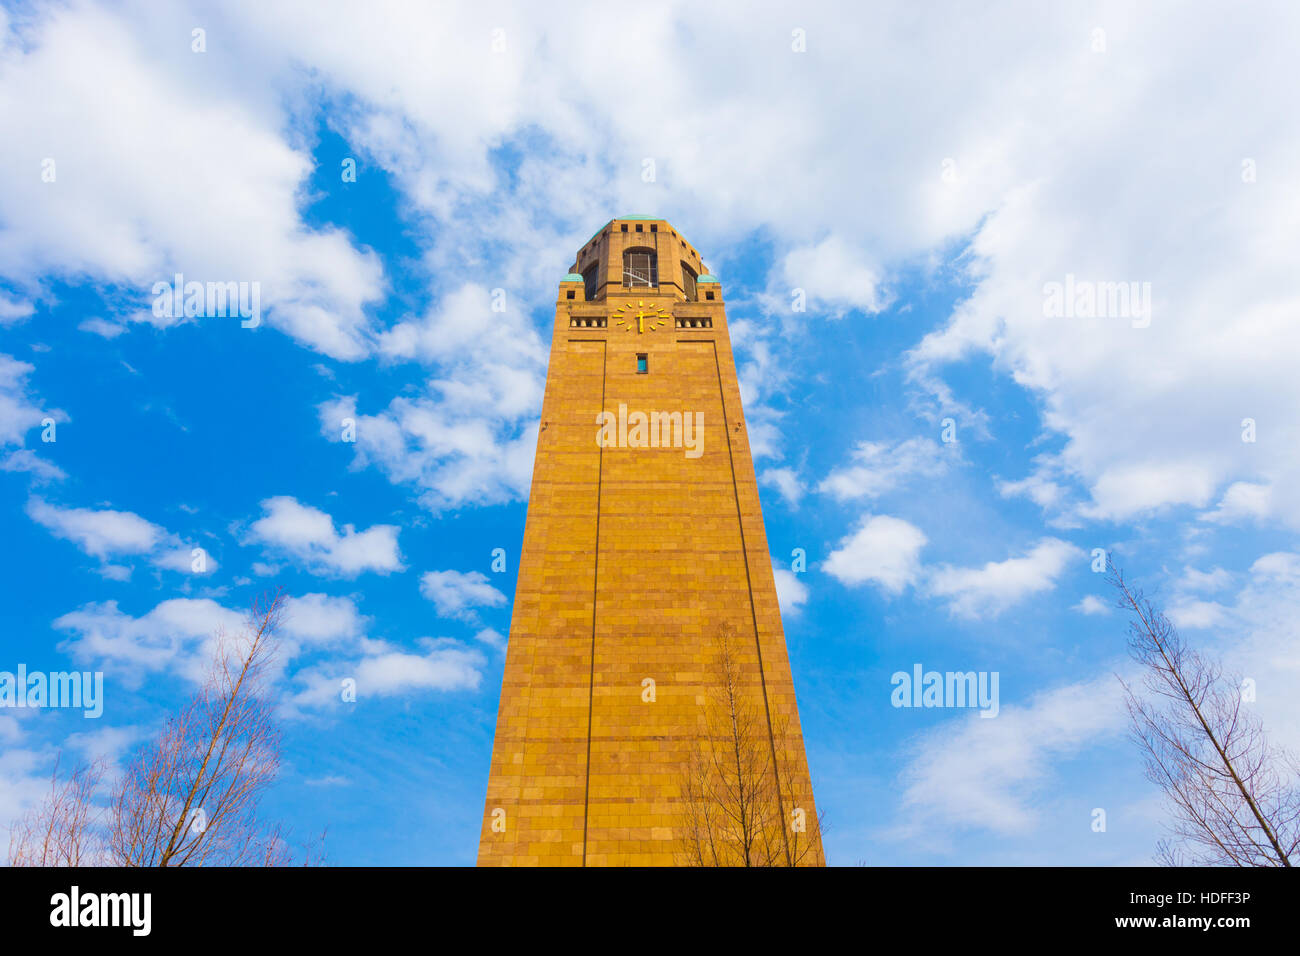 Low angle view of the clock tower on campus of Daejeon Institute of Science and Technology on a sunny blue sky day, South Korea Stock Photo